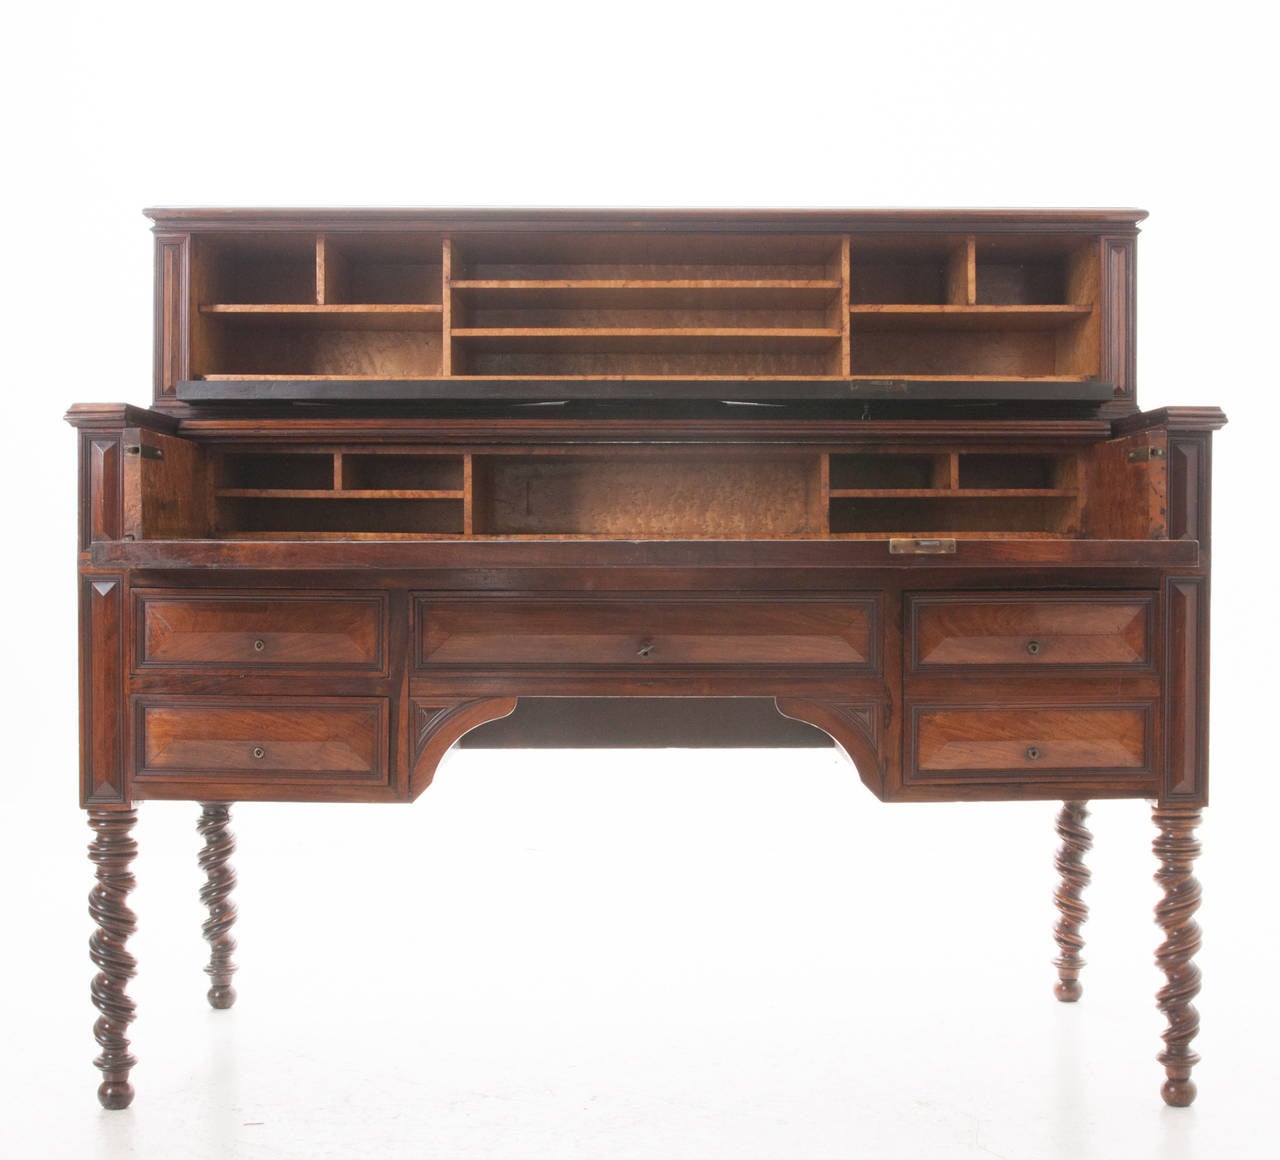 A handsome, impressive carved mahogany desk with gem-cut decorations and fitted bird's-eye maple interiors and original black leather writing surface. A very interesting key unlocks the top part of this fine desk, folding down to an interior fitted